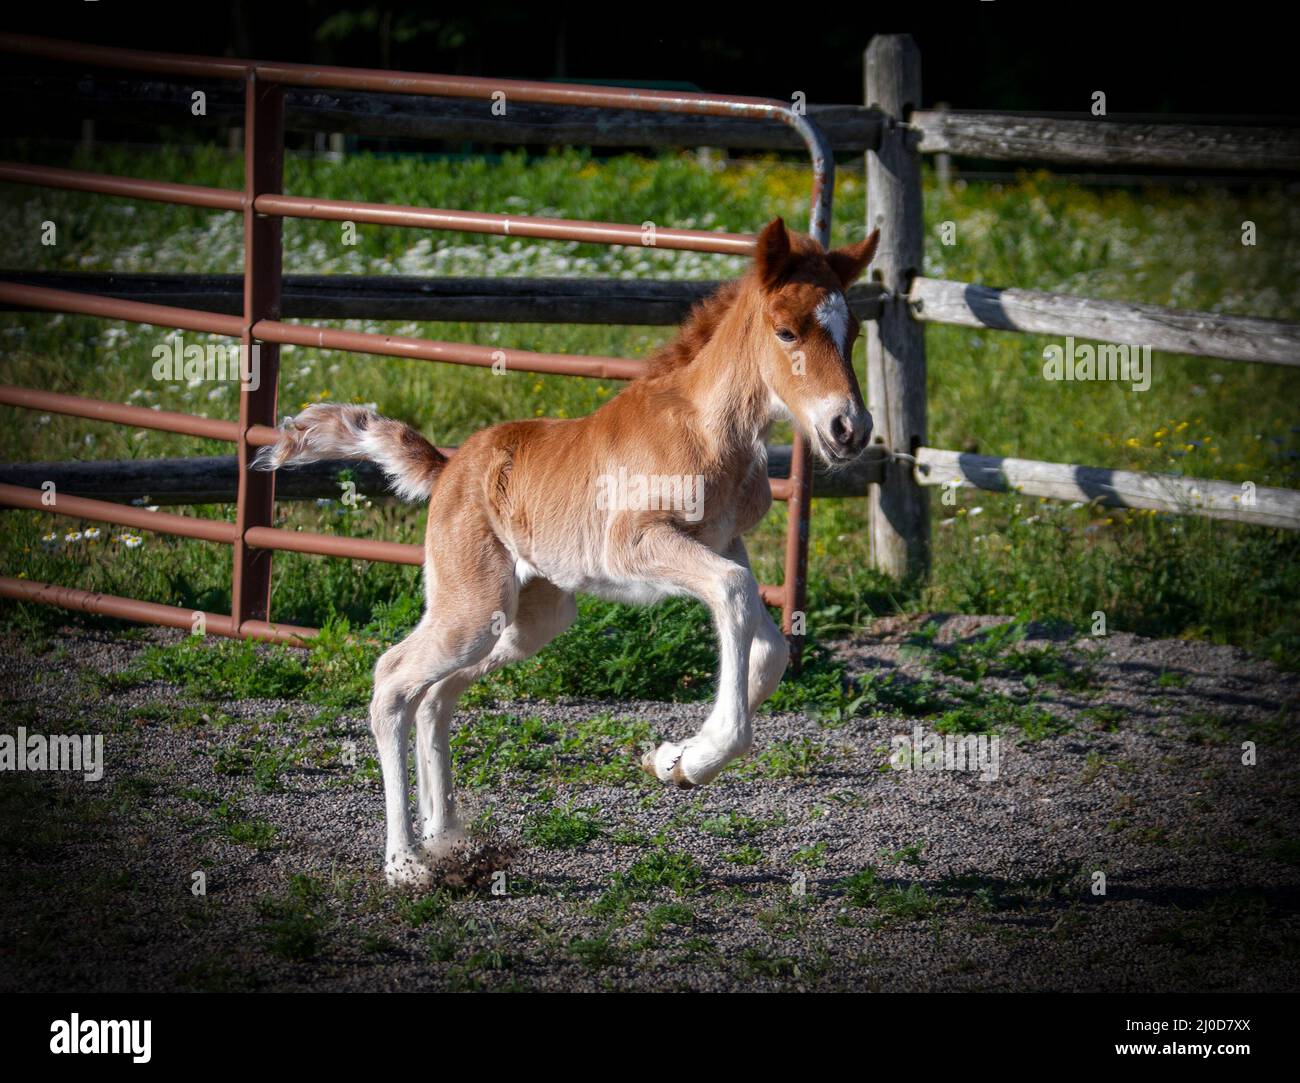 An Icelandic horse foal runs in the paddock Stock Photo